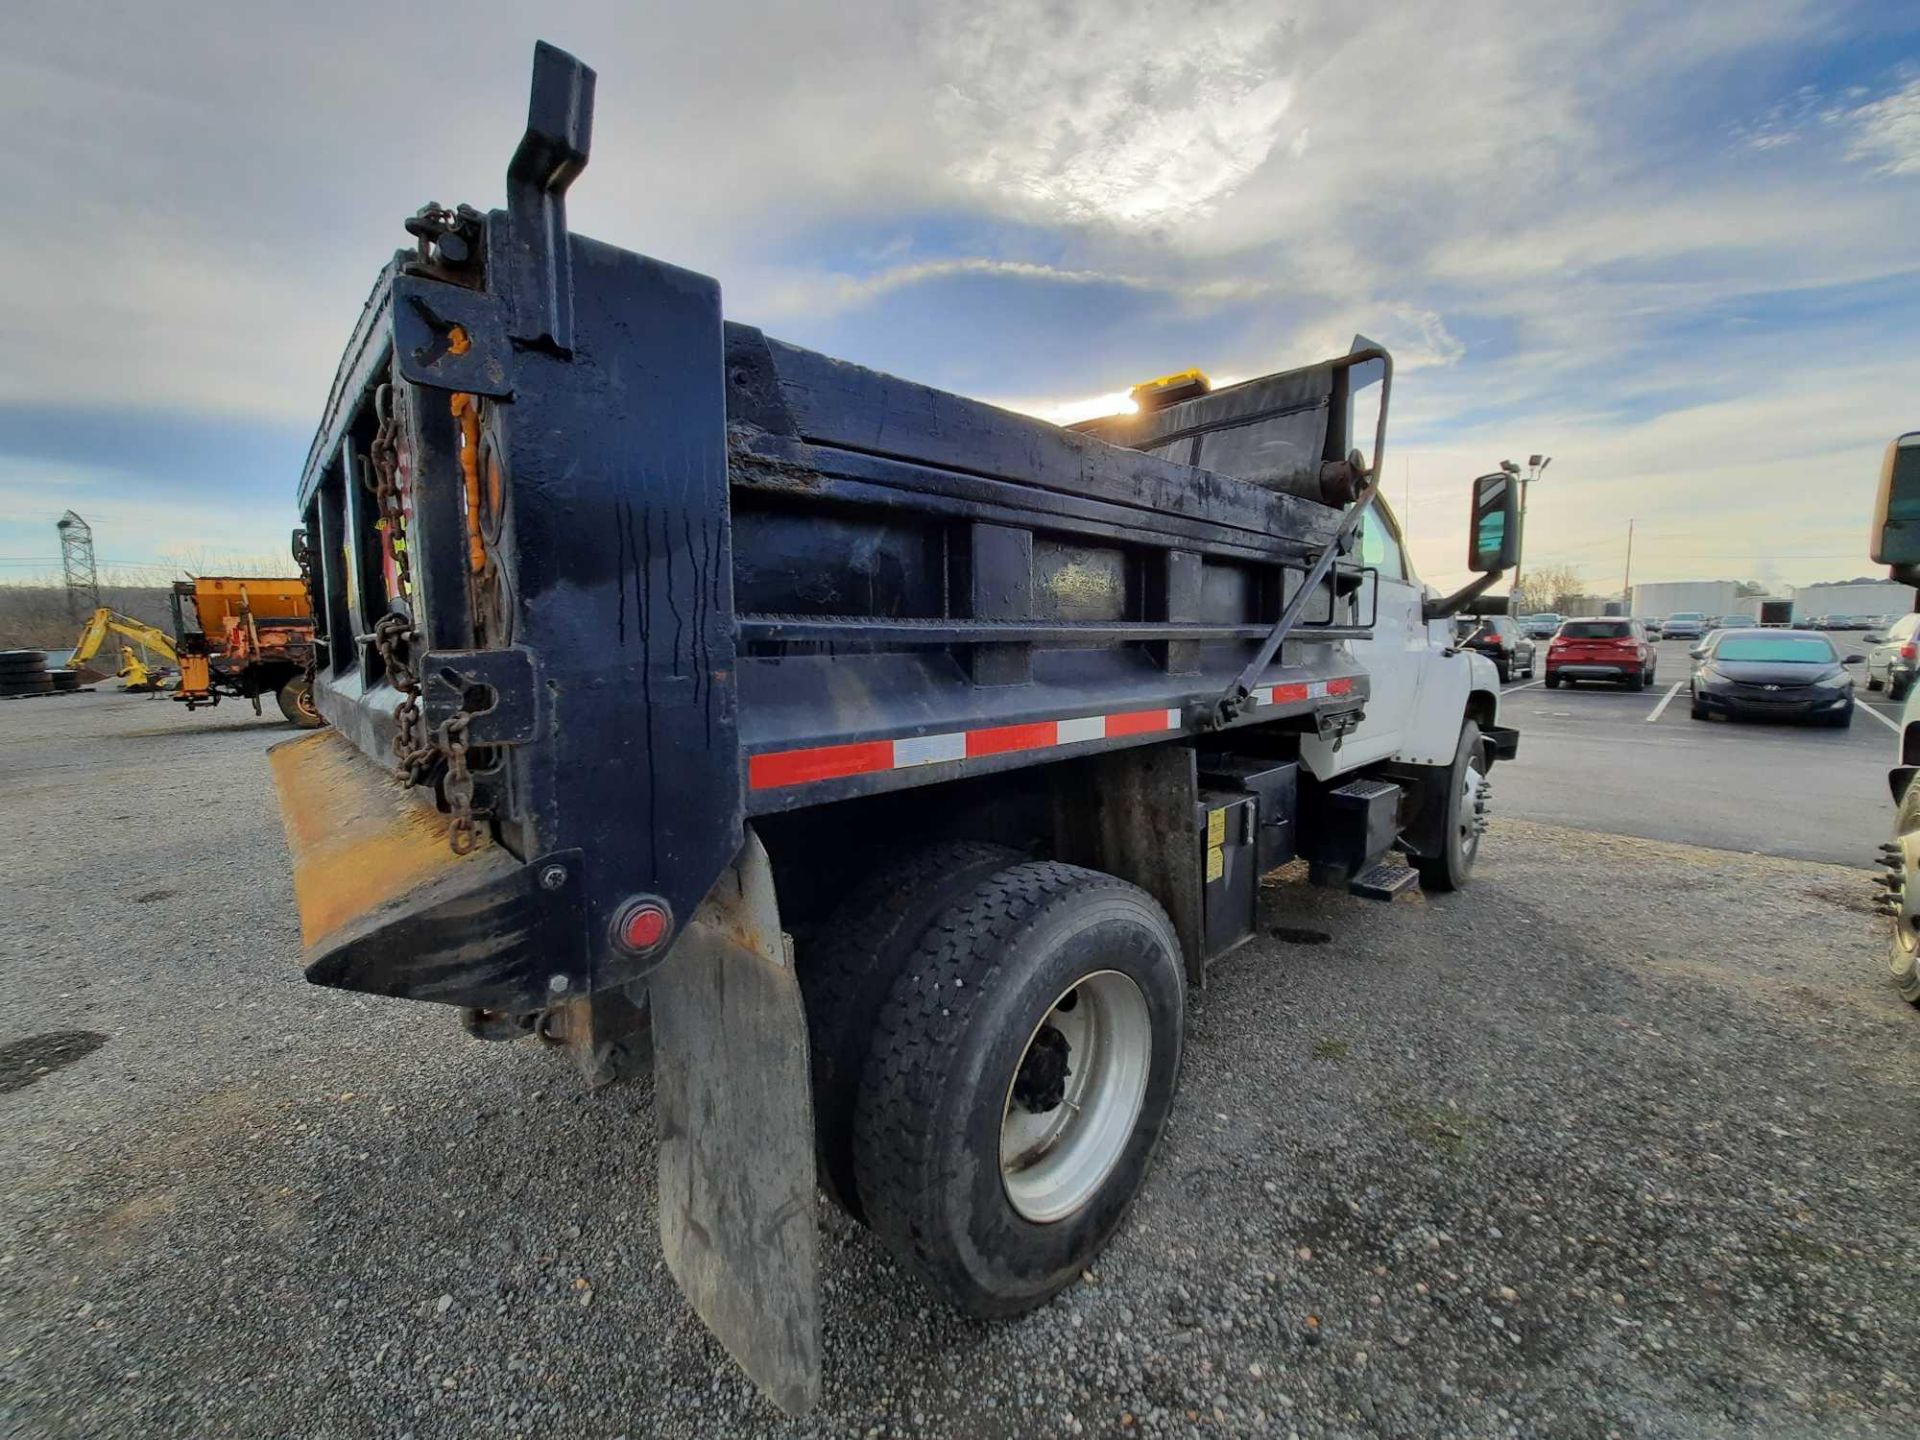 2006 GMC 7500 S/A 10' DUMP TRUCK (INOPERABLE) (VDOT UNIT: R08282) - Image 3 of 4